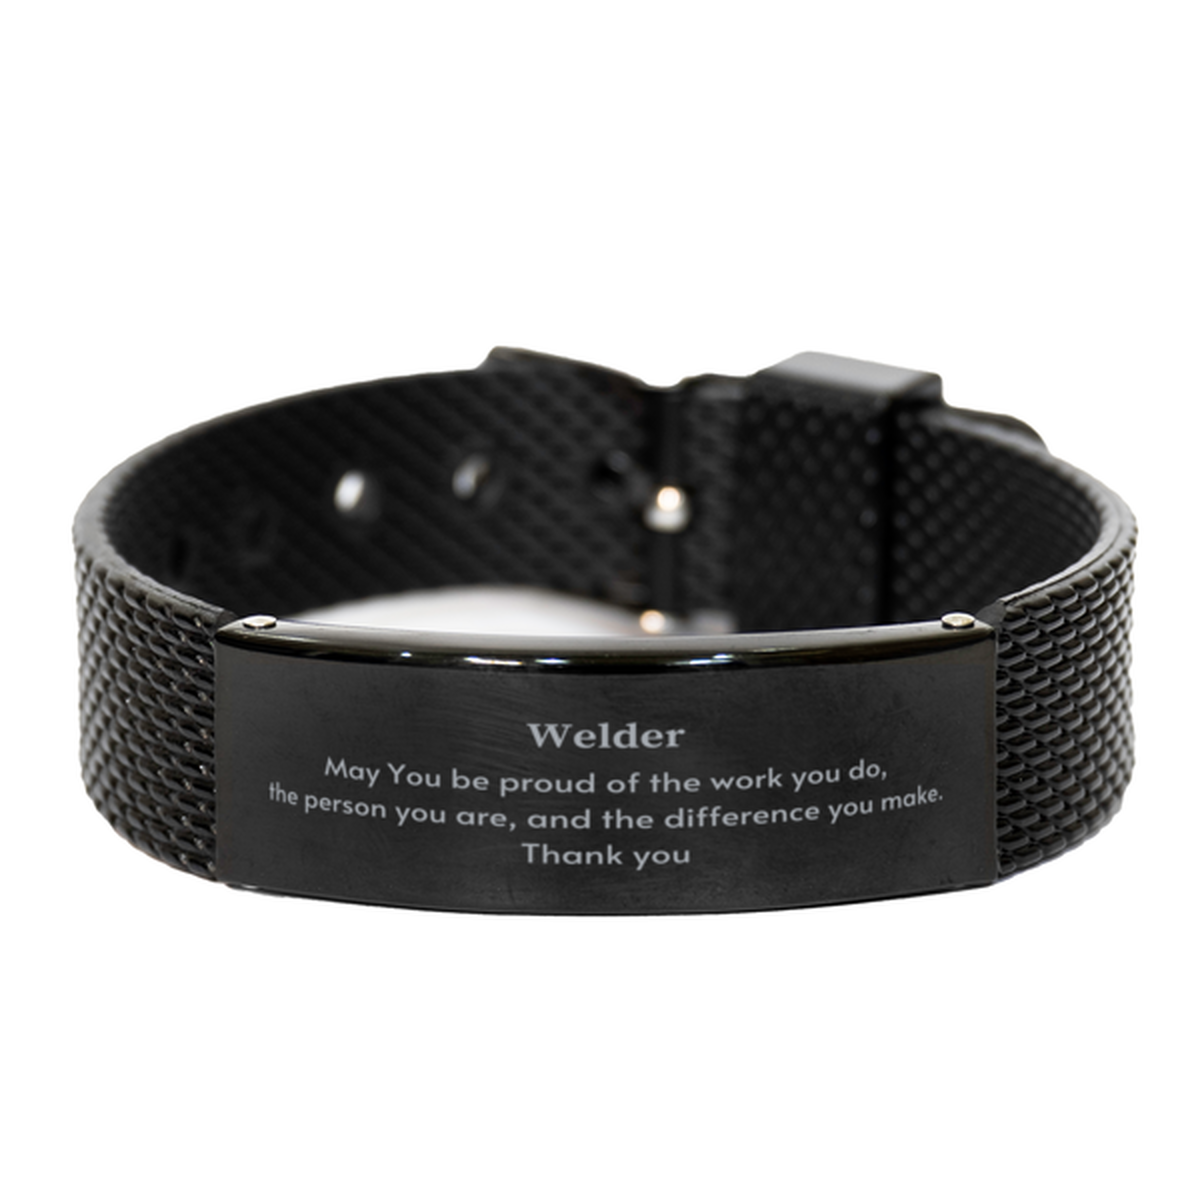 Heartwarming Black Shark Mesh Bracelet Retirement Coworkers Gifts for Welder, Welder May You be proud of the work you do, the person you are Gifts for Boss Men Women Friends